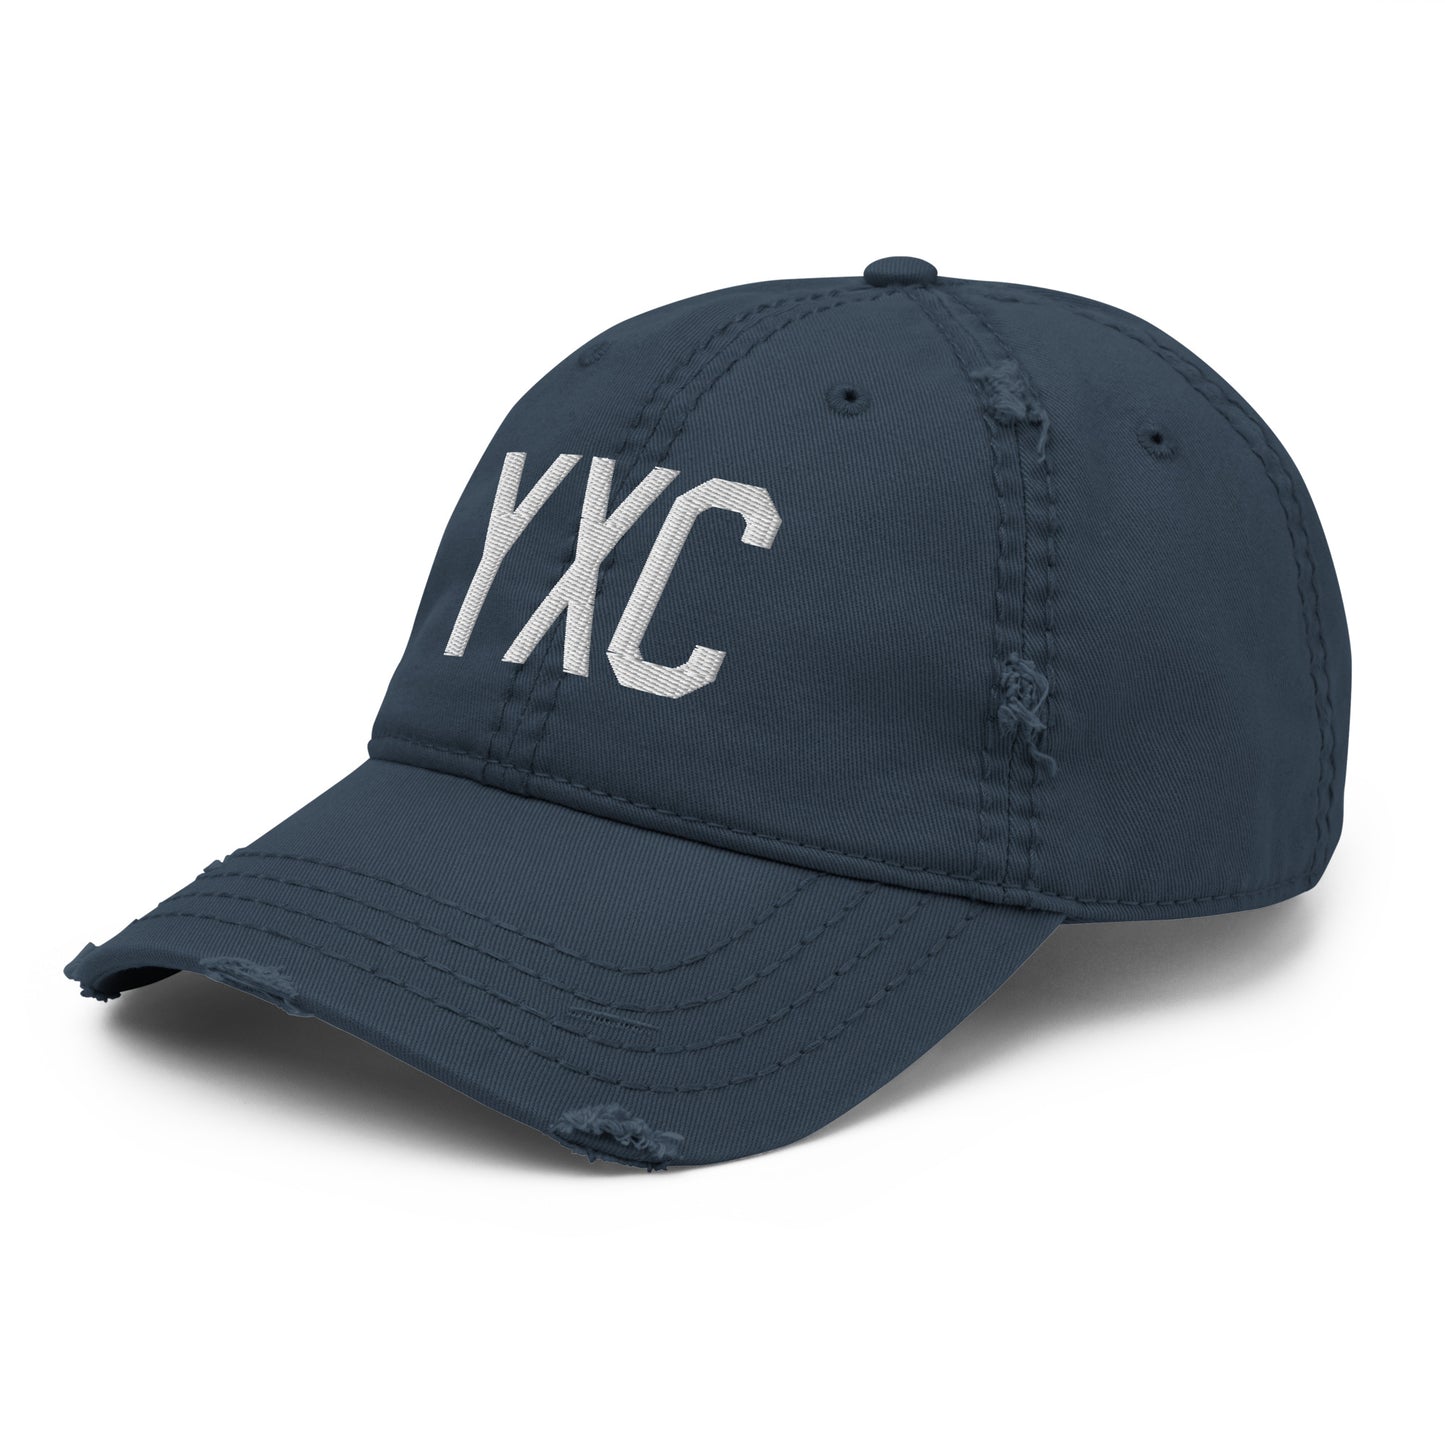 Airport Code Distressed Hat - White • YXC Cranbrook • YHM Designs - Image 01